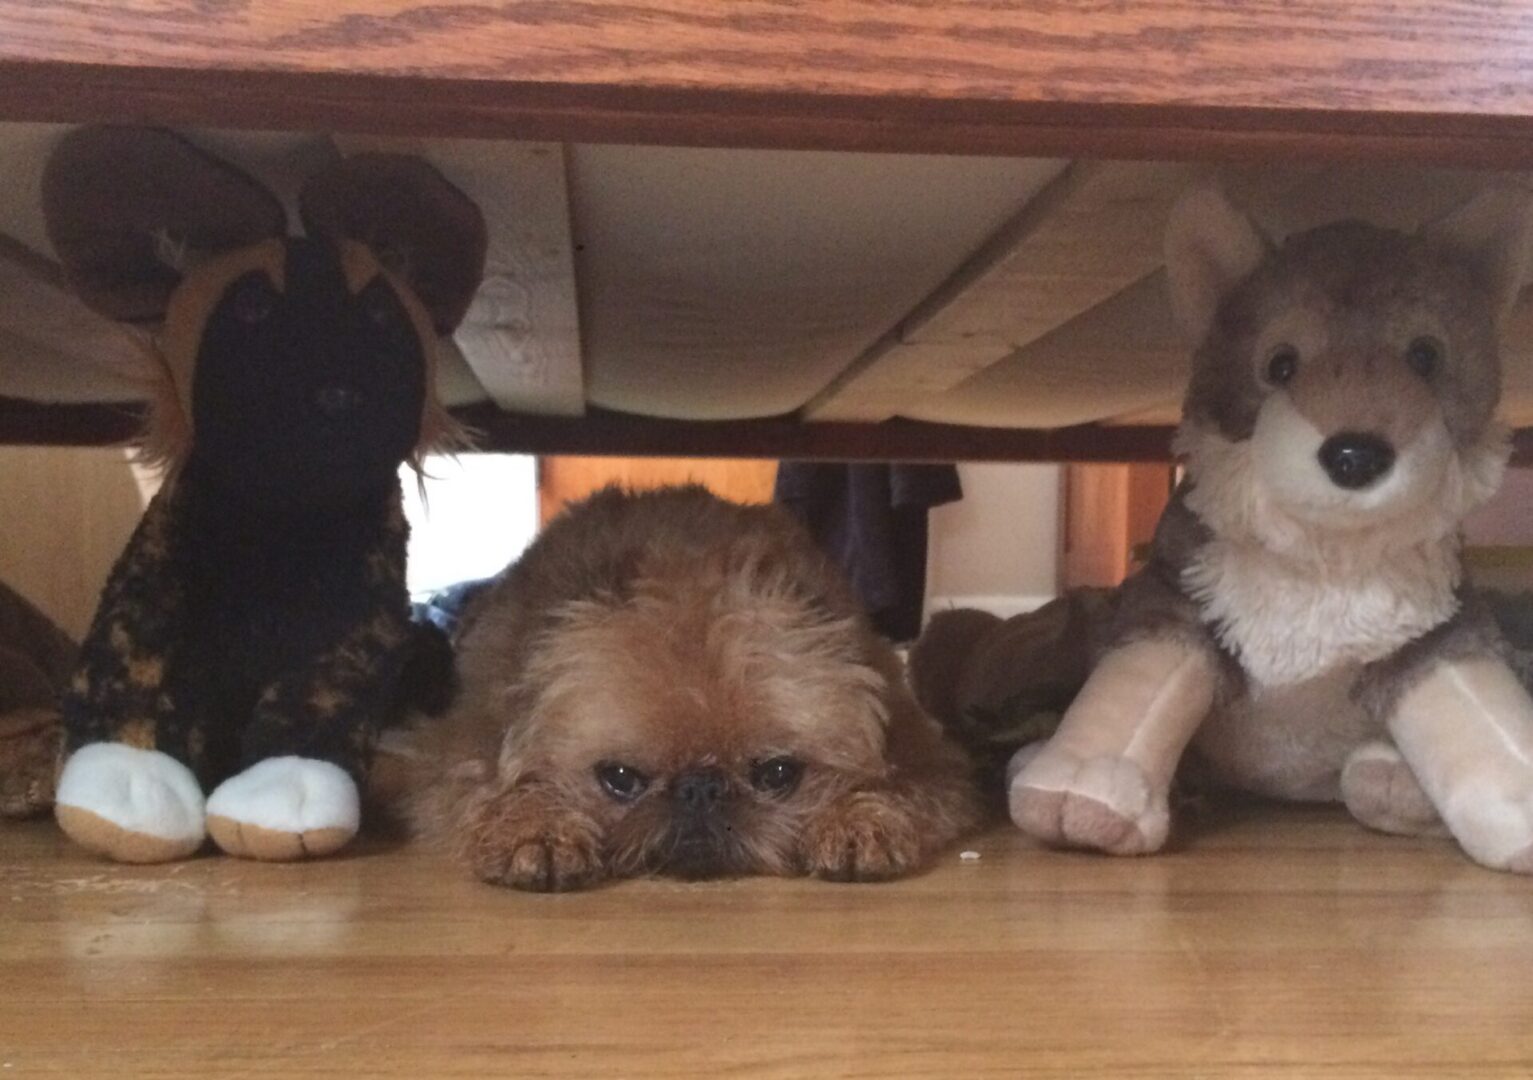 A dog hiding under the bed with stuffed animals